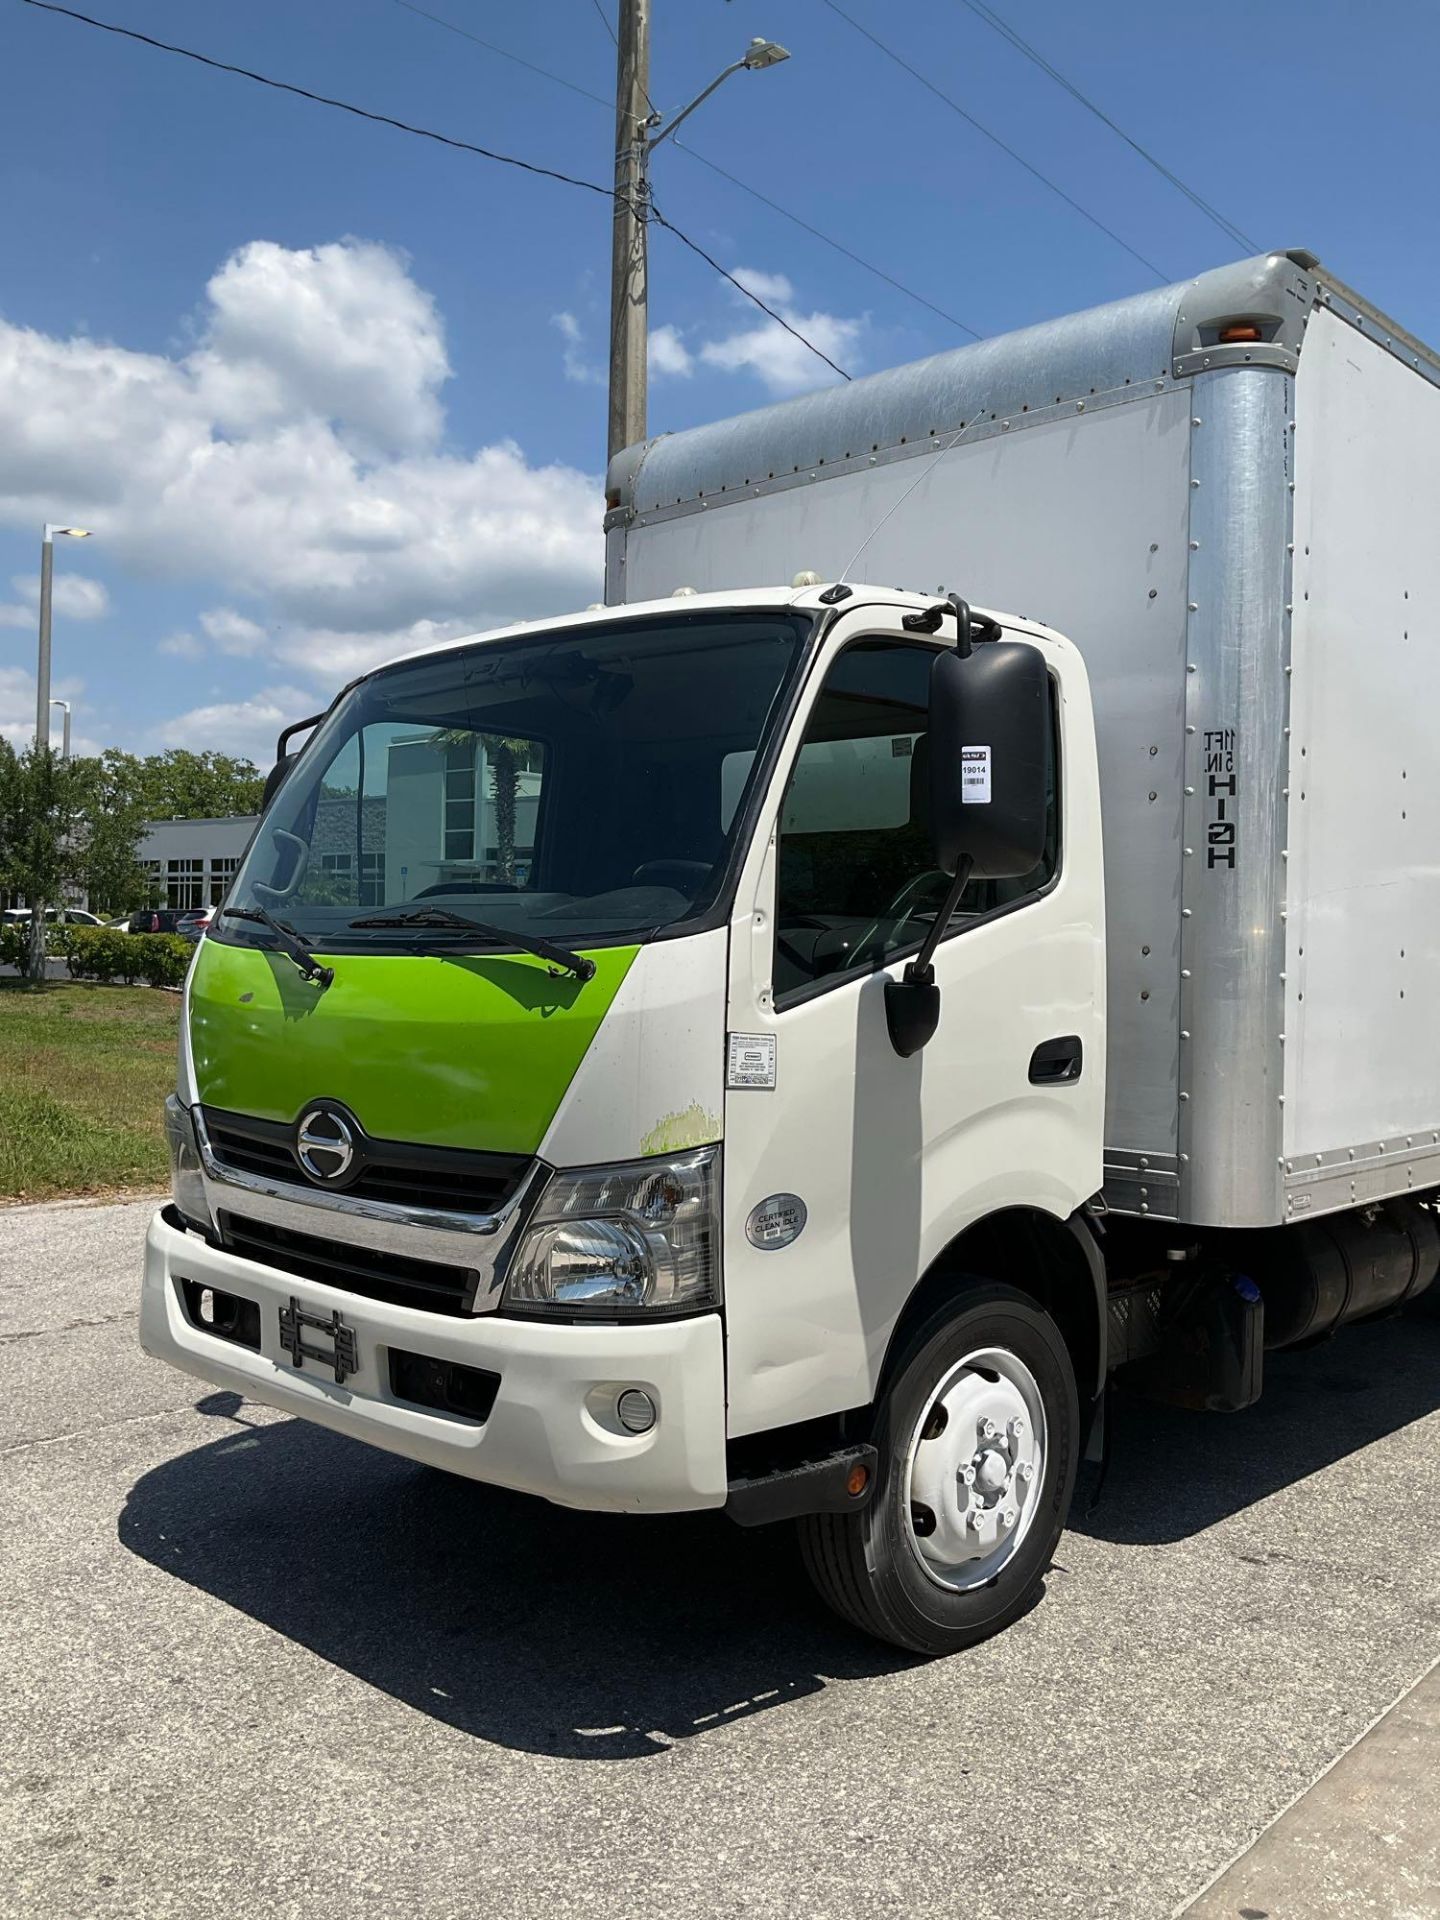 2017 HINO 740 BOX TRUCK, DIESEL , APPROX GVWR 17,950 LBS, BOX BODY APPROX 18FT, ETRACKS, BACK UP ... - Image 8 of 23